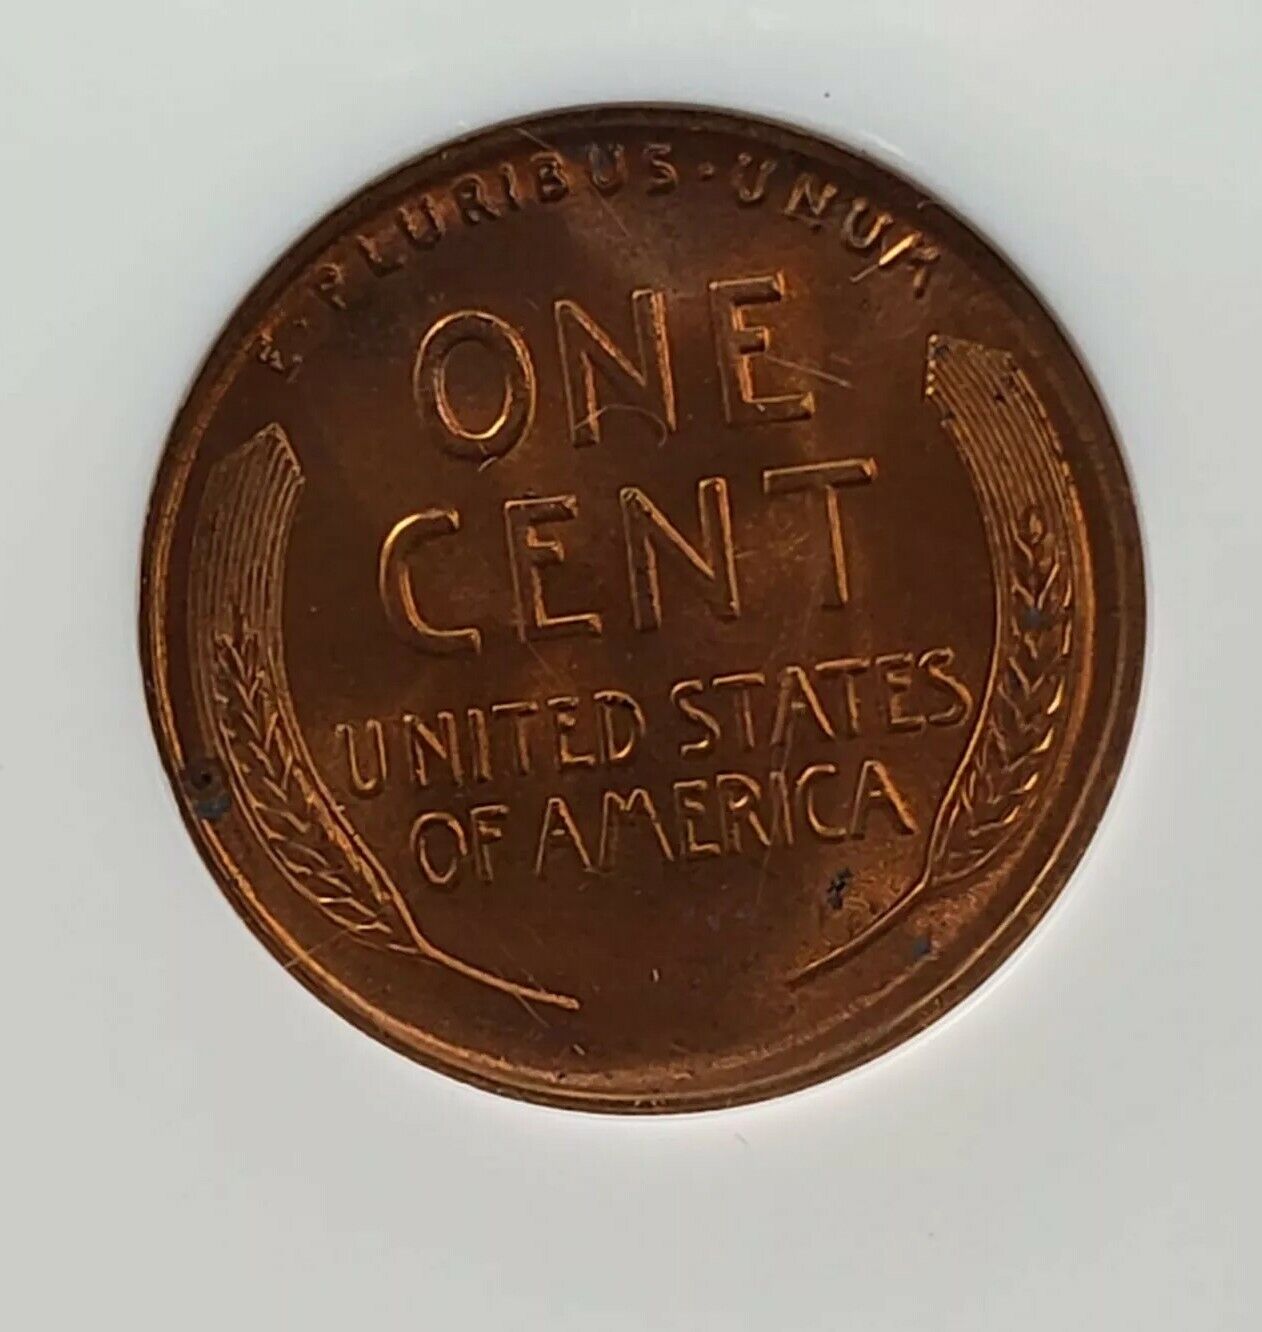 1937 D Lincoln Wheat Cent Penny Coin NGC MS67 RD GEM BU DENVER CERTIFIED